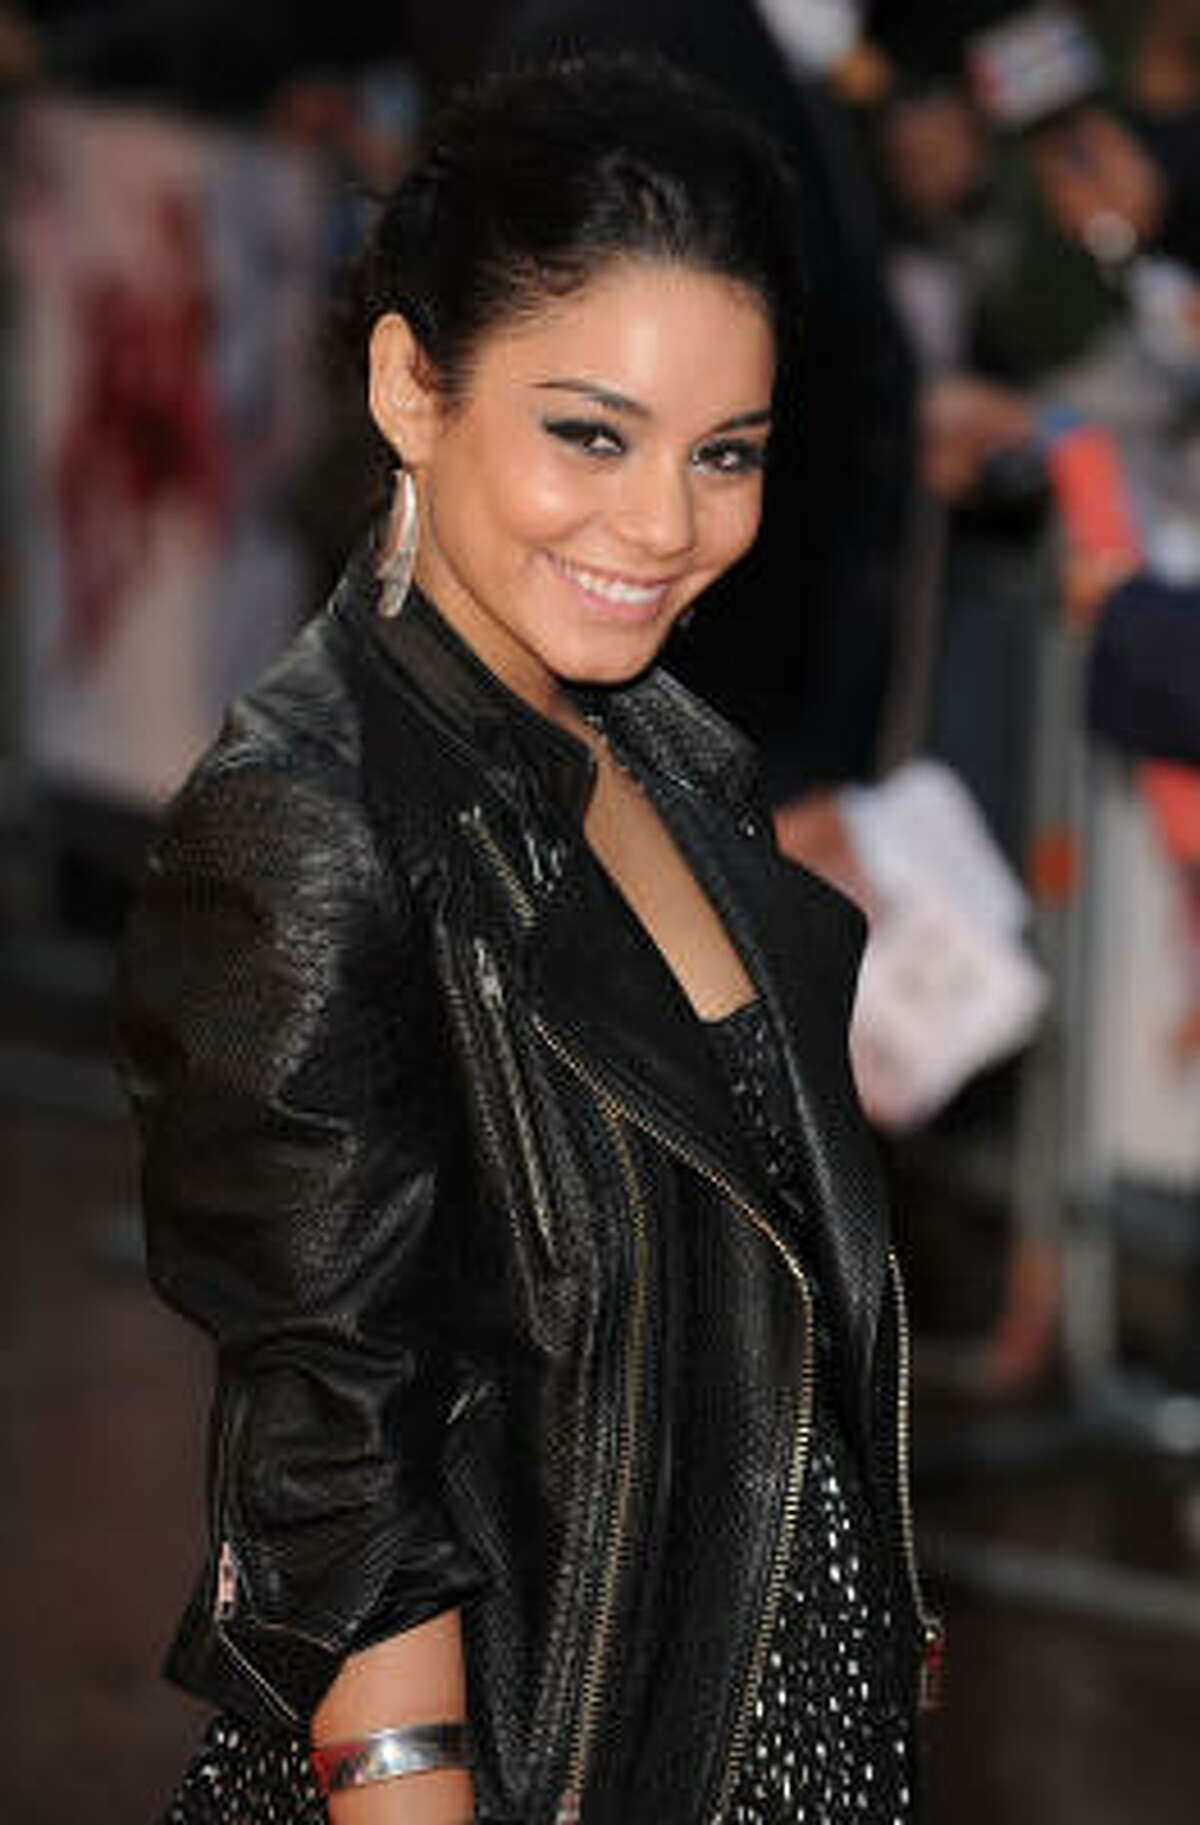 Vanessa Hudgens' latest film Bandslam comes out in theaters Friday. To read more about the interview with Vanessa Hudgesn, click here.